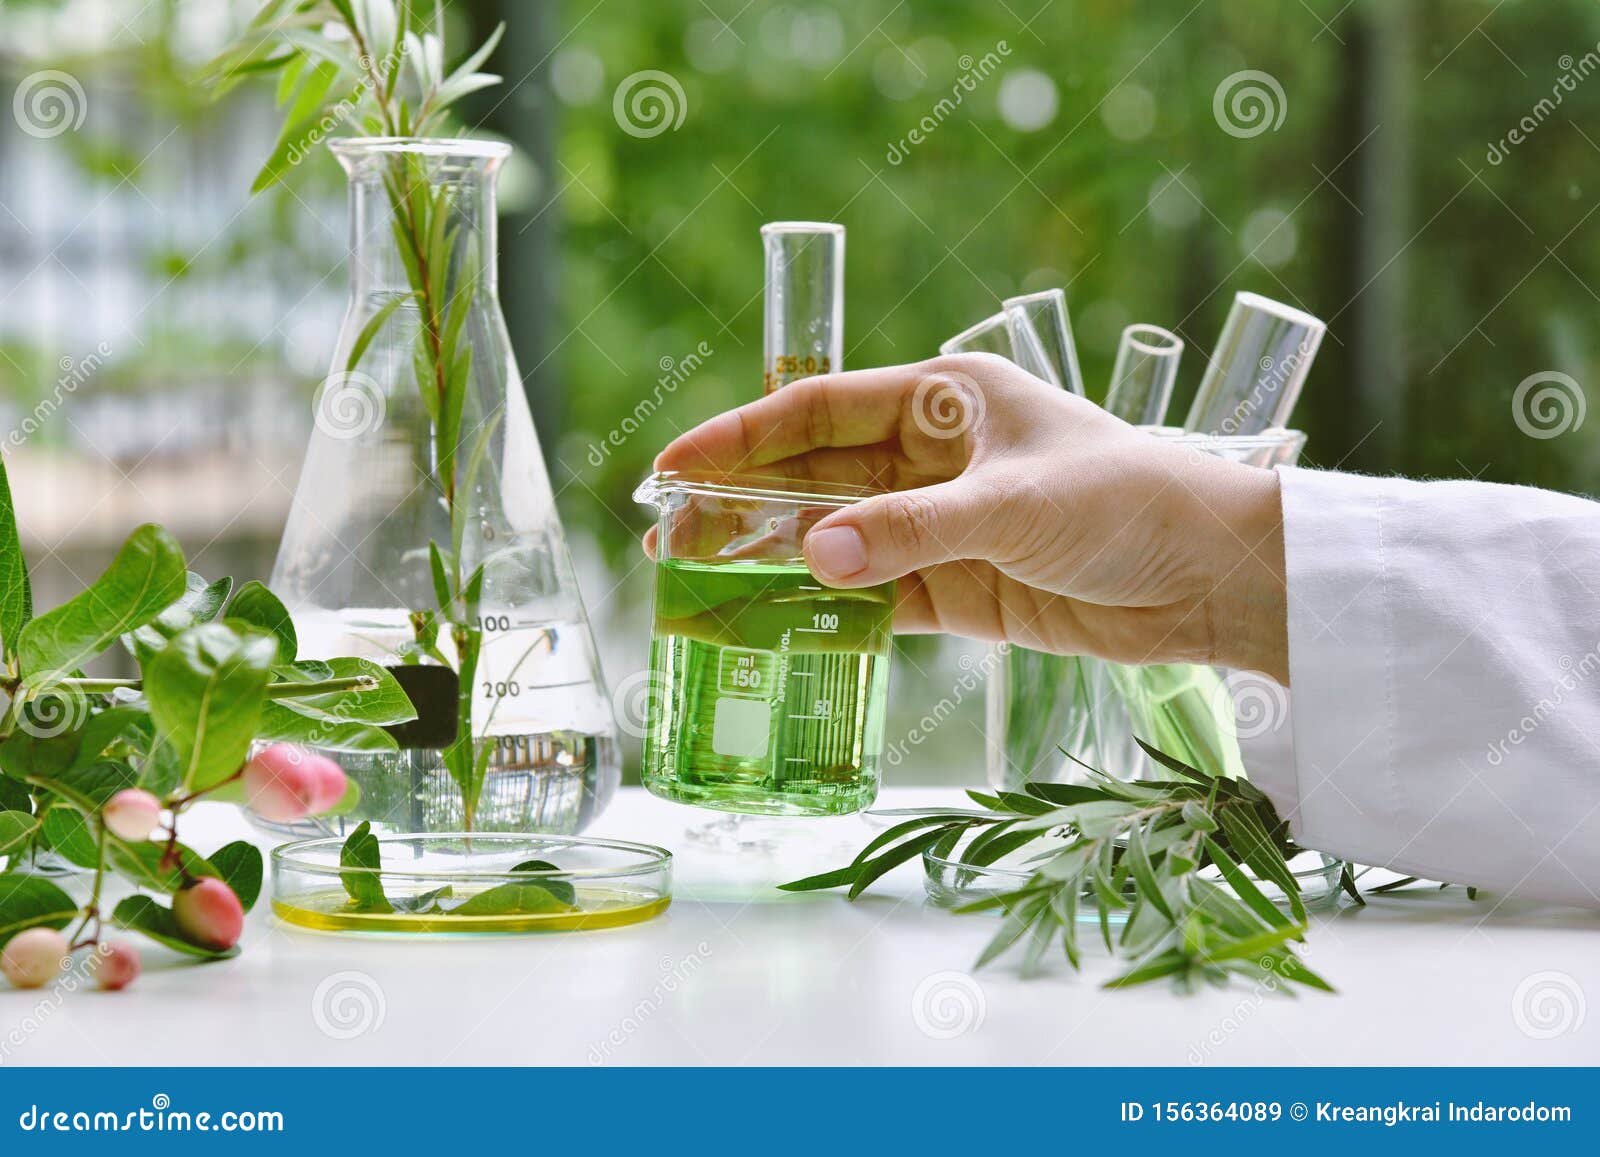 scientist with natural drug research, natural organic and scientific extraction in glassware, alternative green herb medicine.